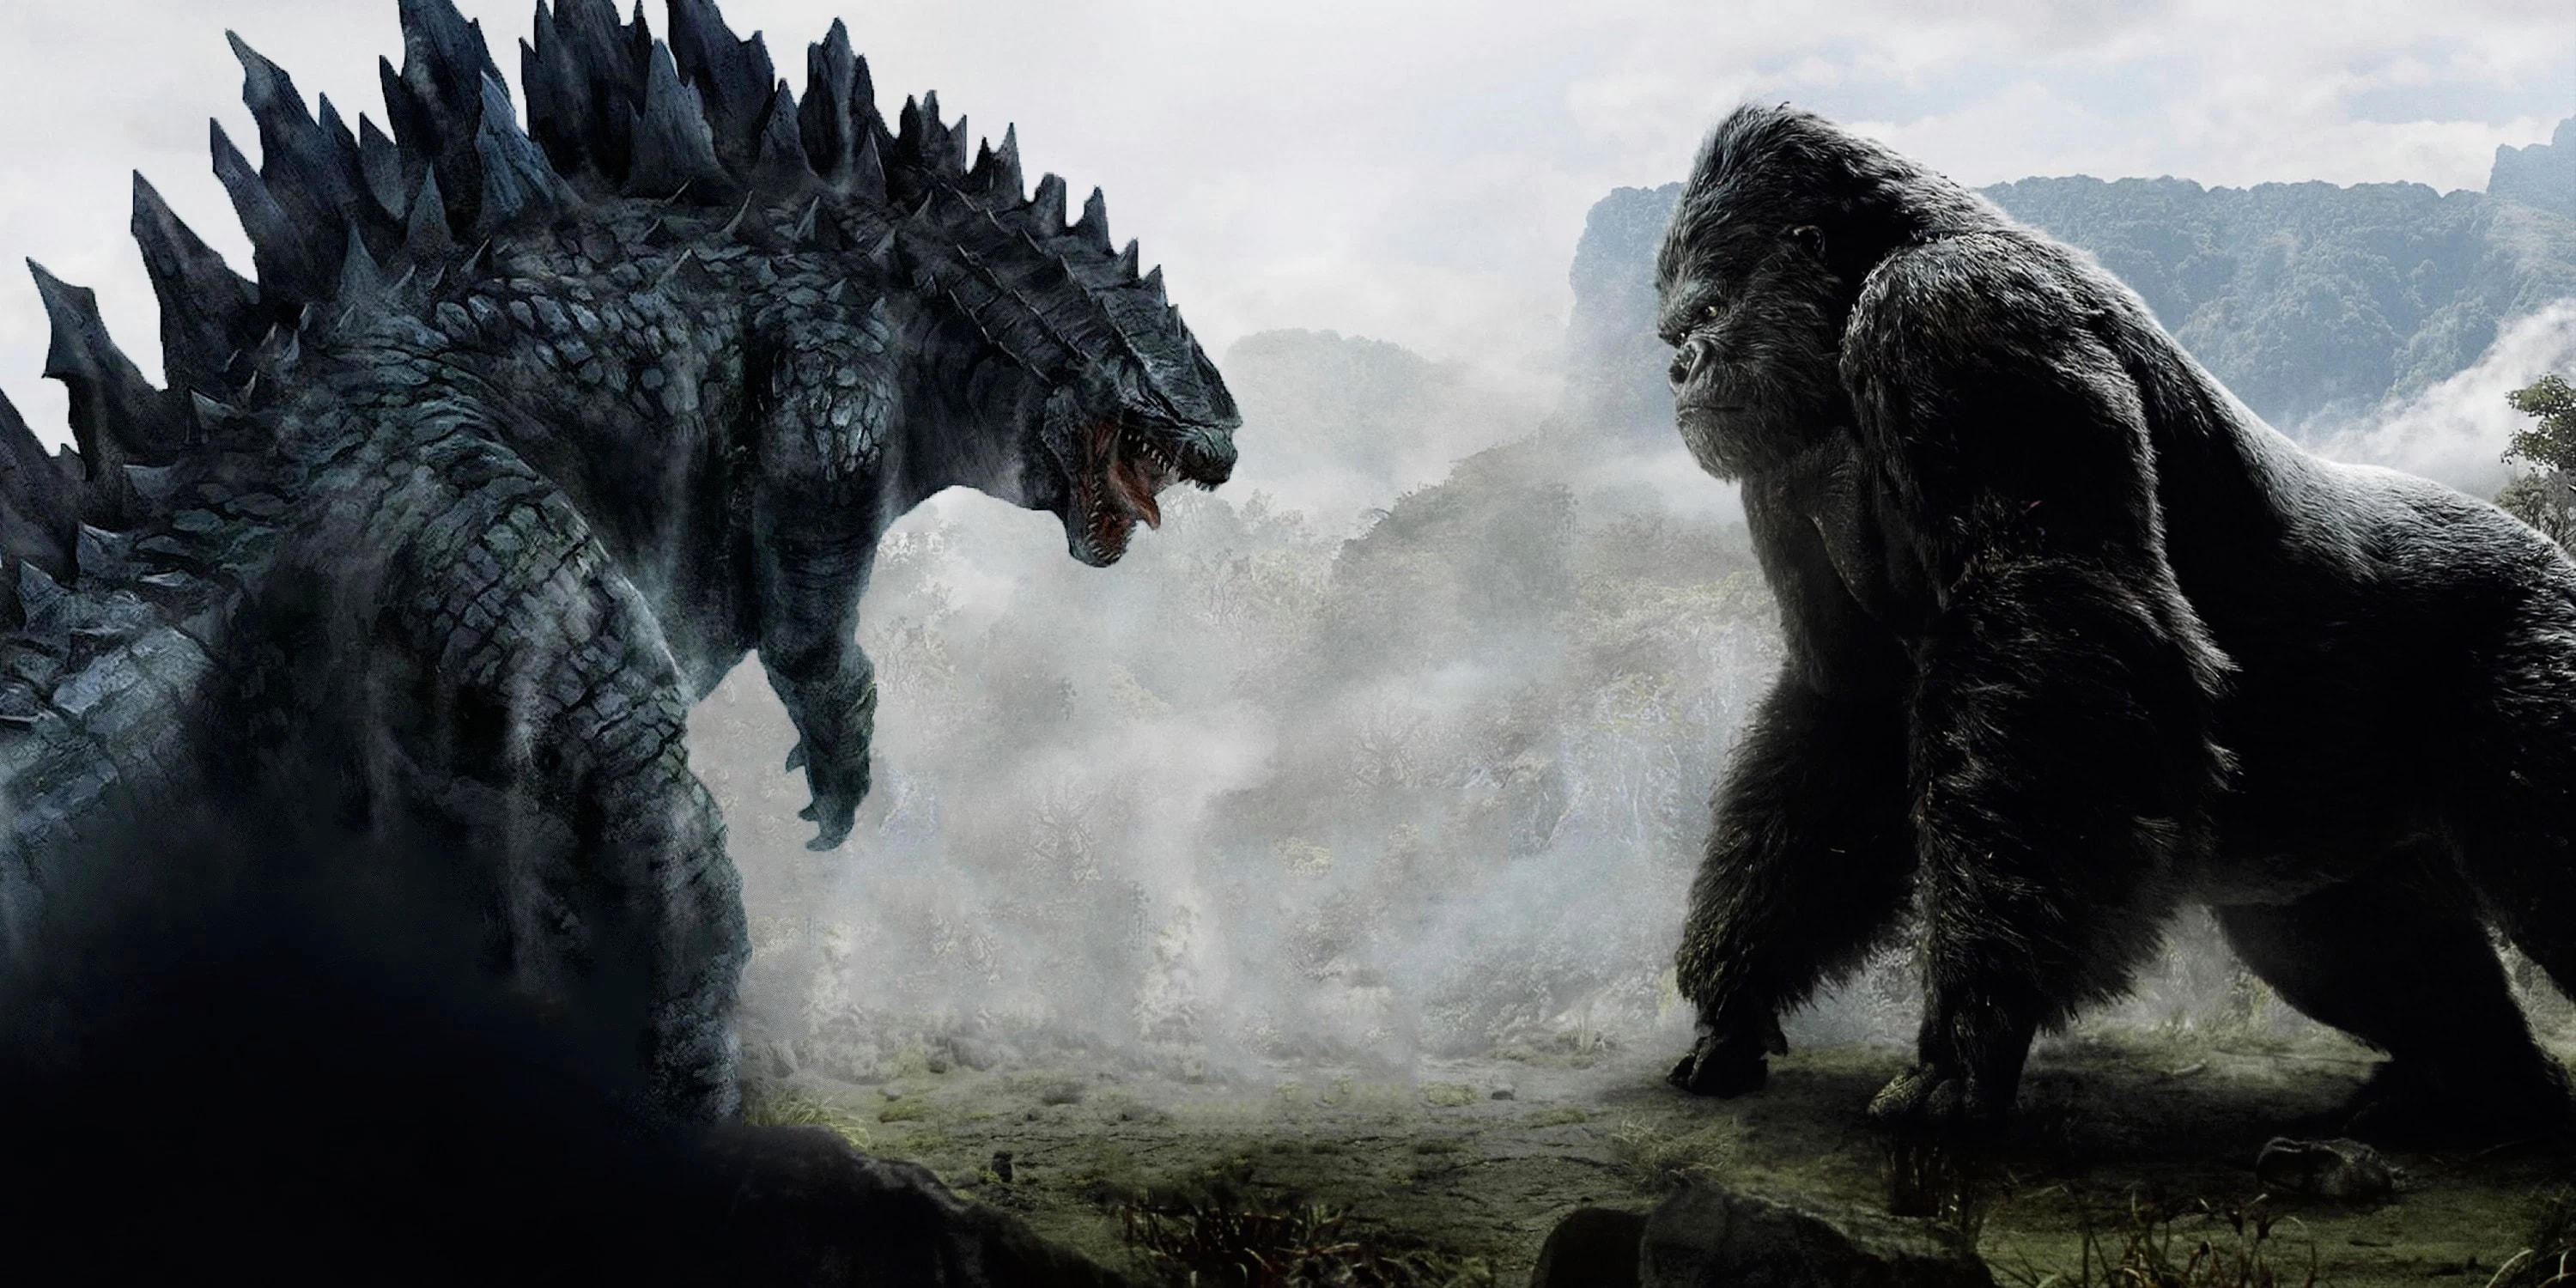 10 Greatest Crossover Battles in Cinematic History King Kong Skull Island Godzilla Marvel DC Universe Justice League Avengers